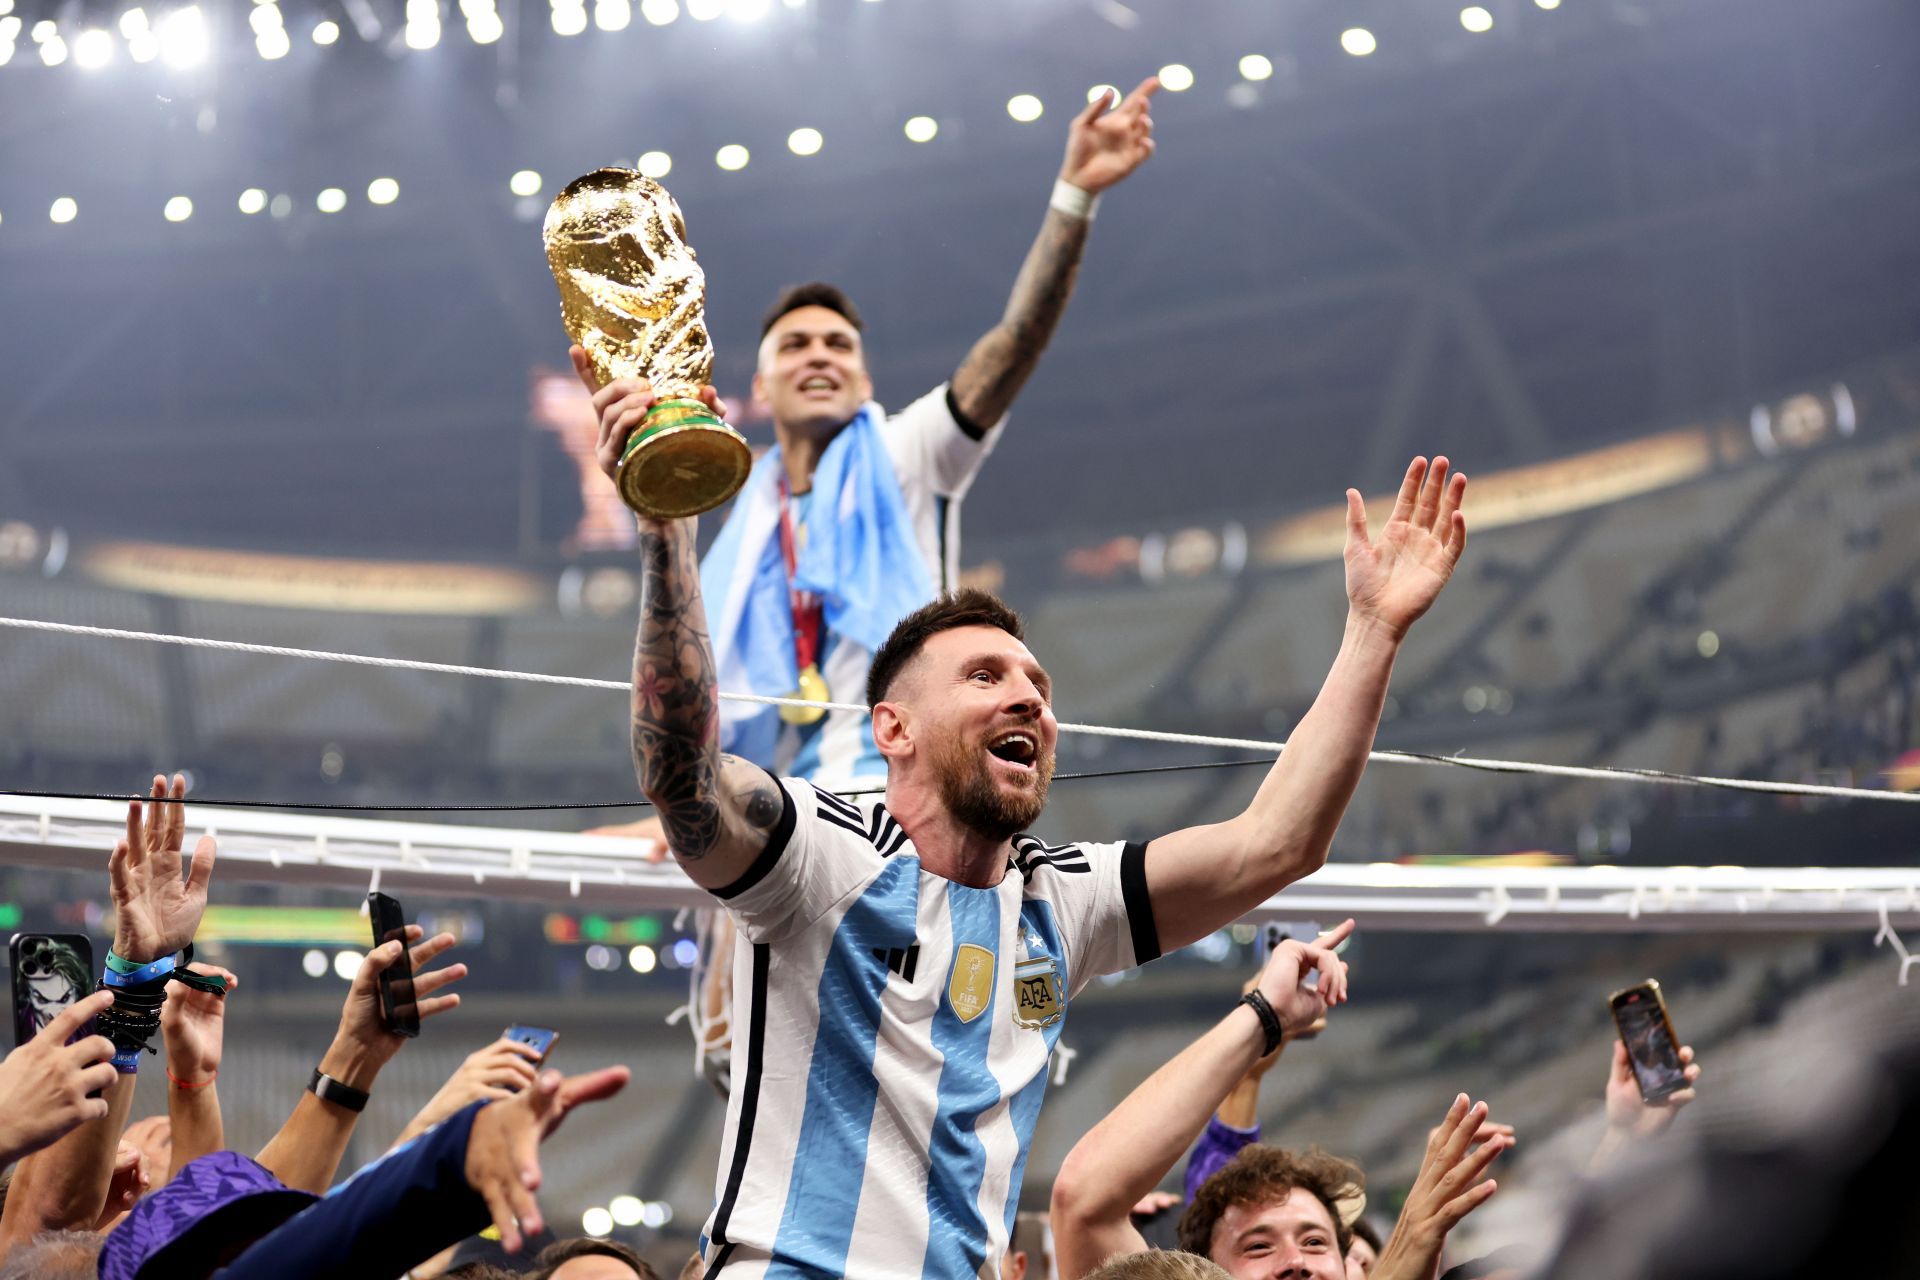 Lionel Messi celebrating after winning the World Cup trophy